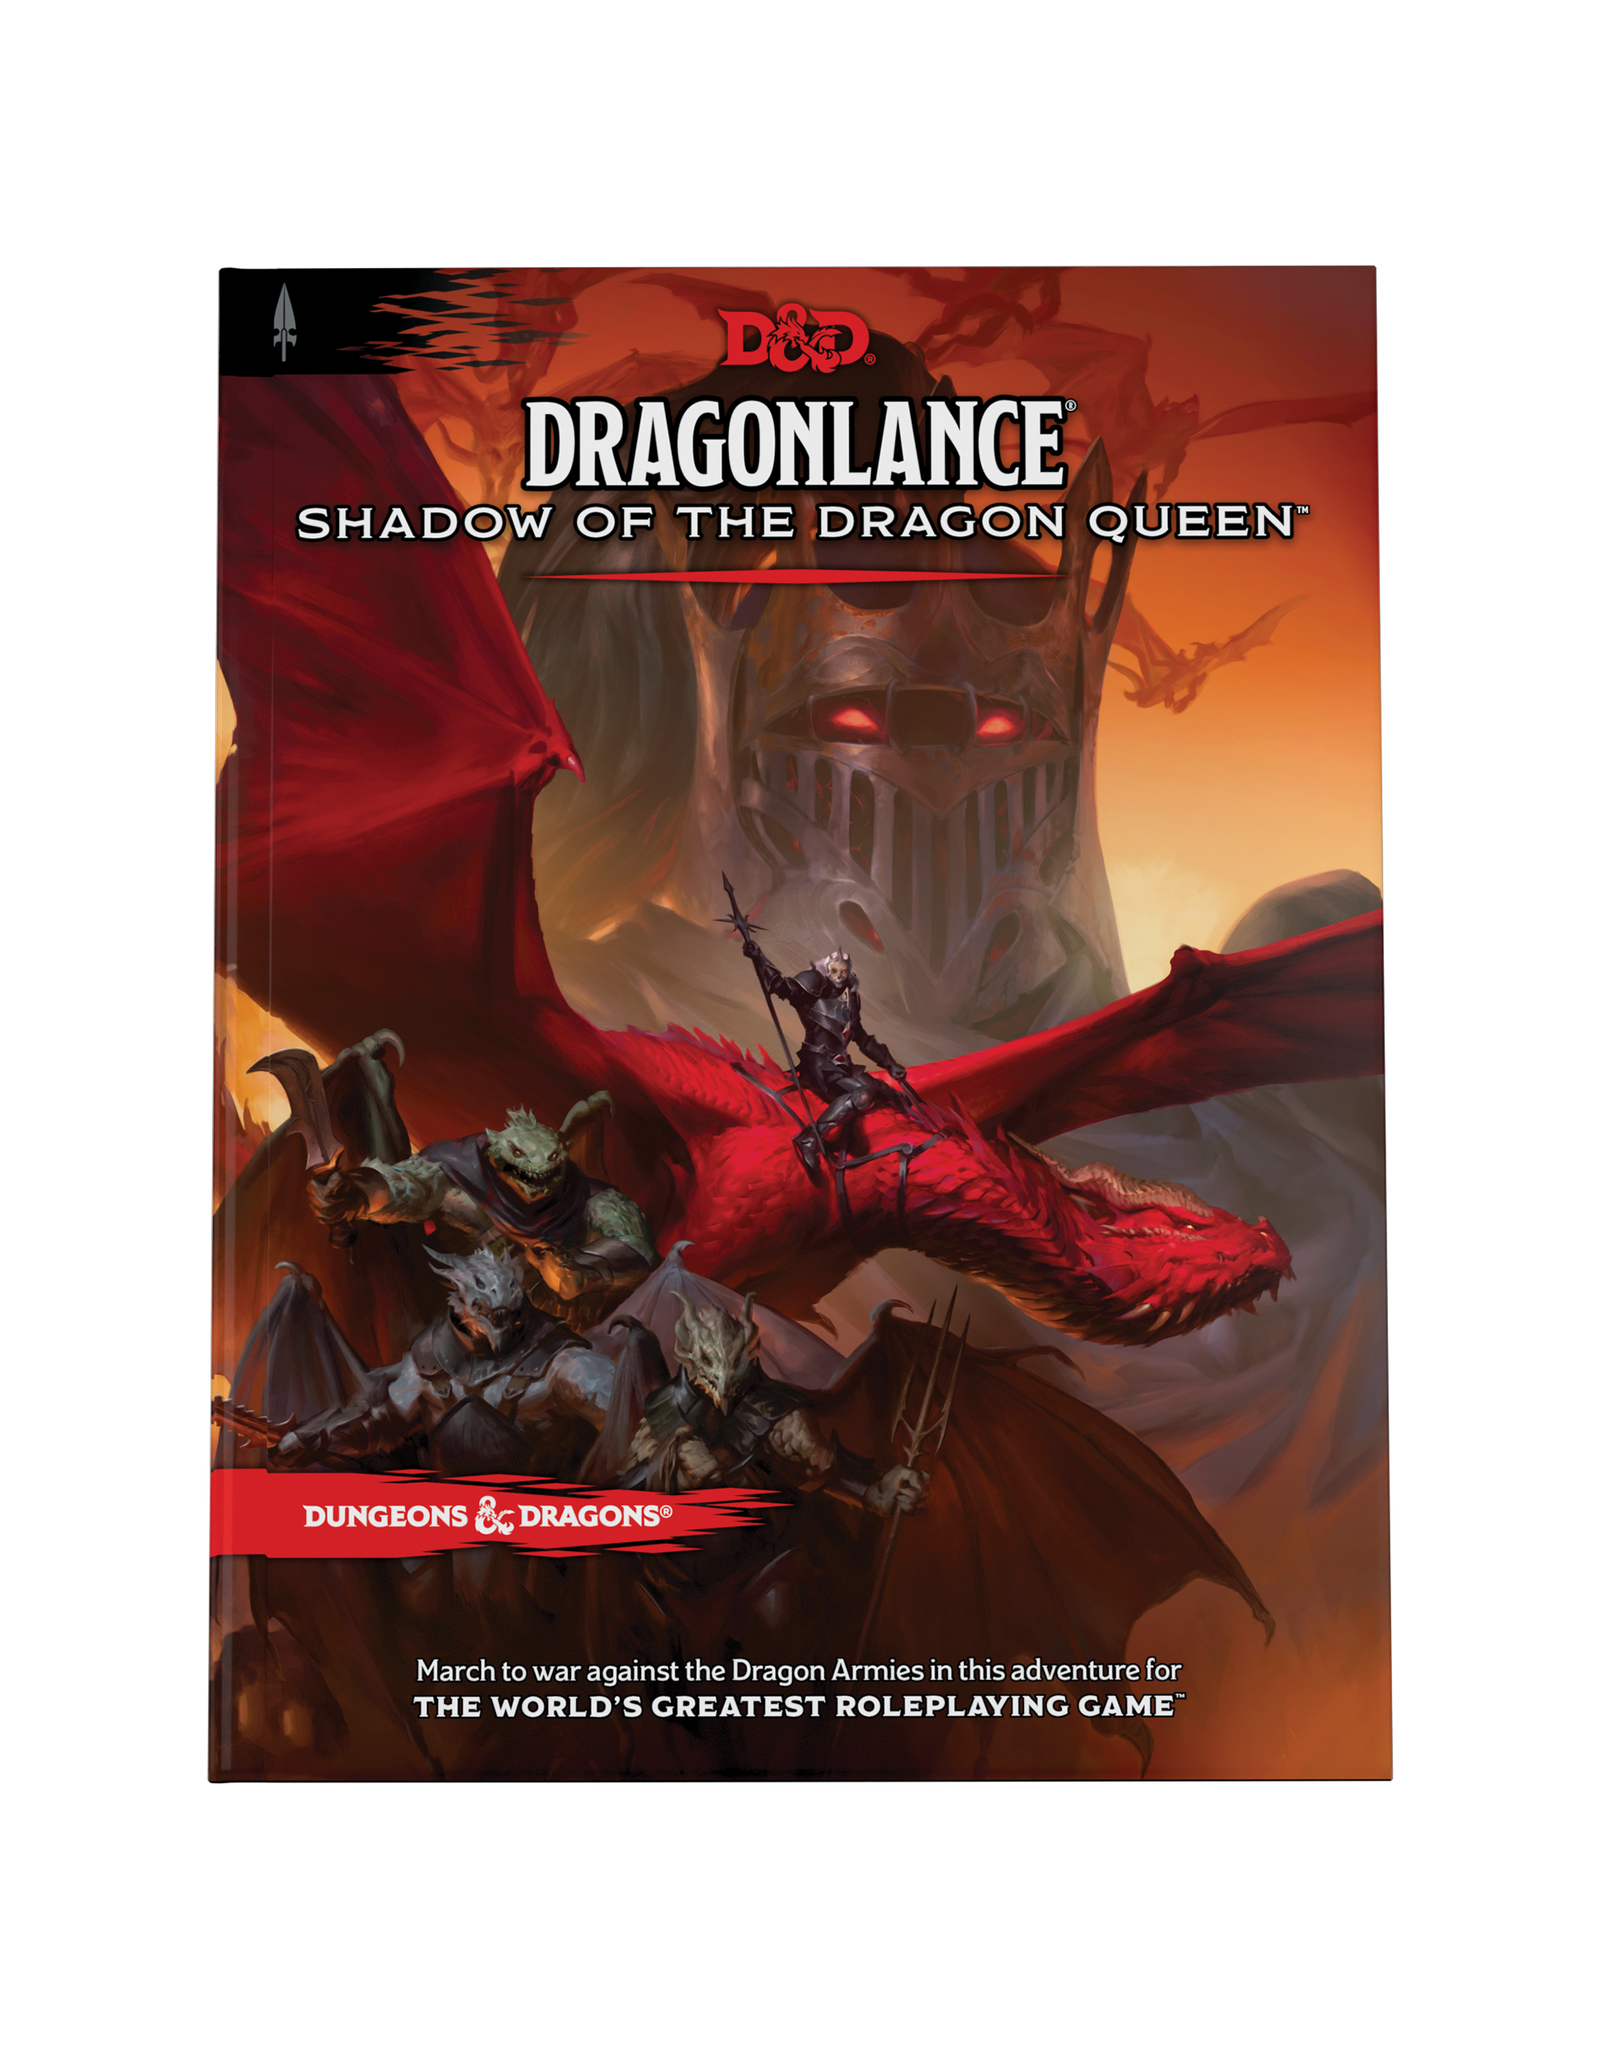 Dungeons & Dragons - Dragonlance - Shadow of the Dragon Queen